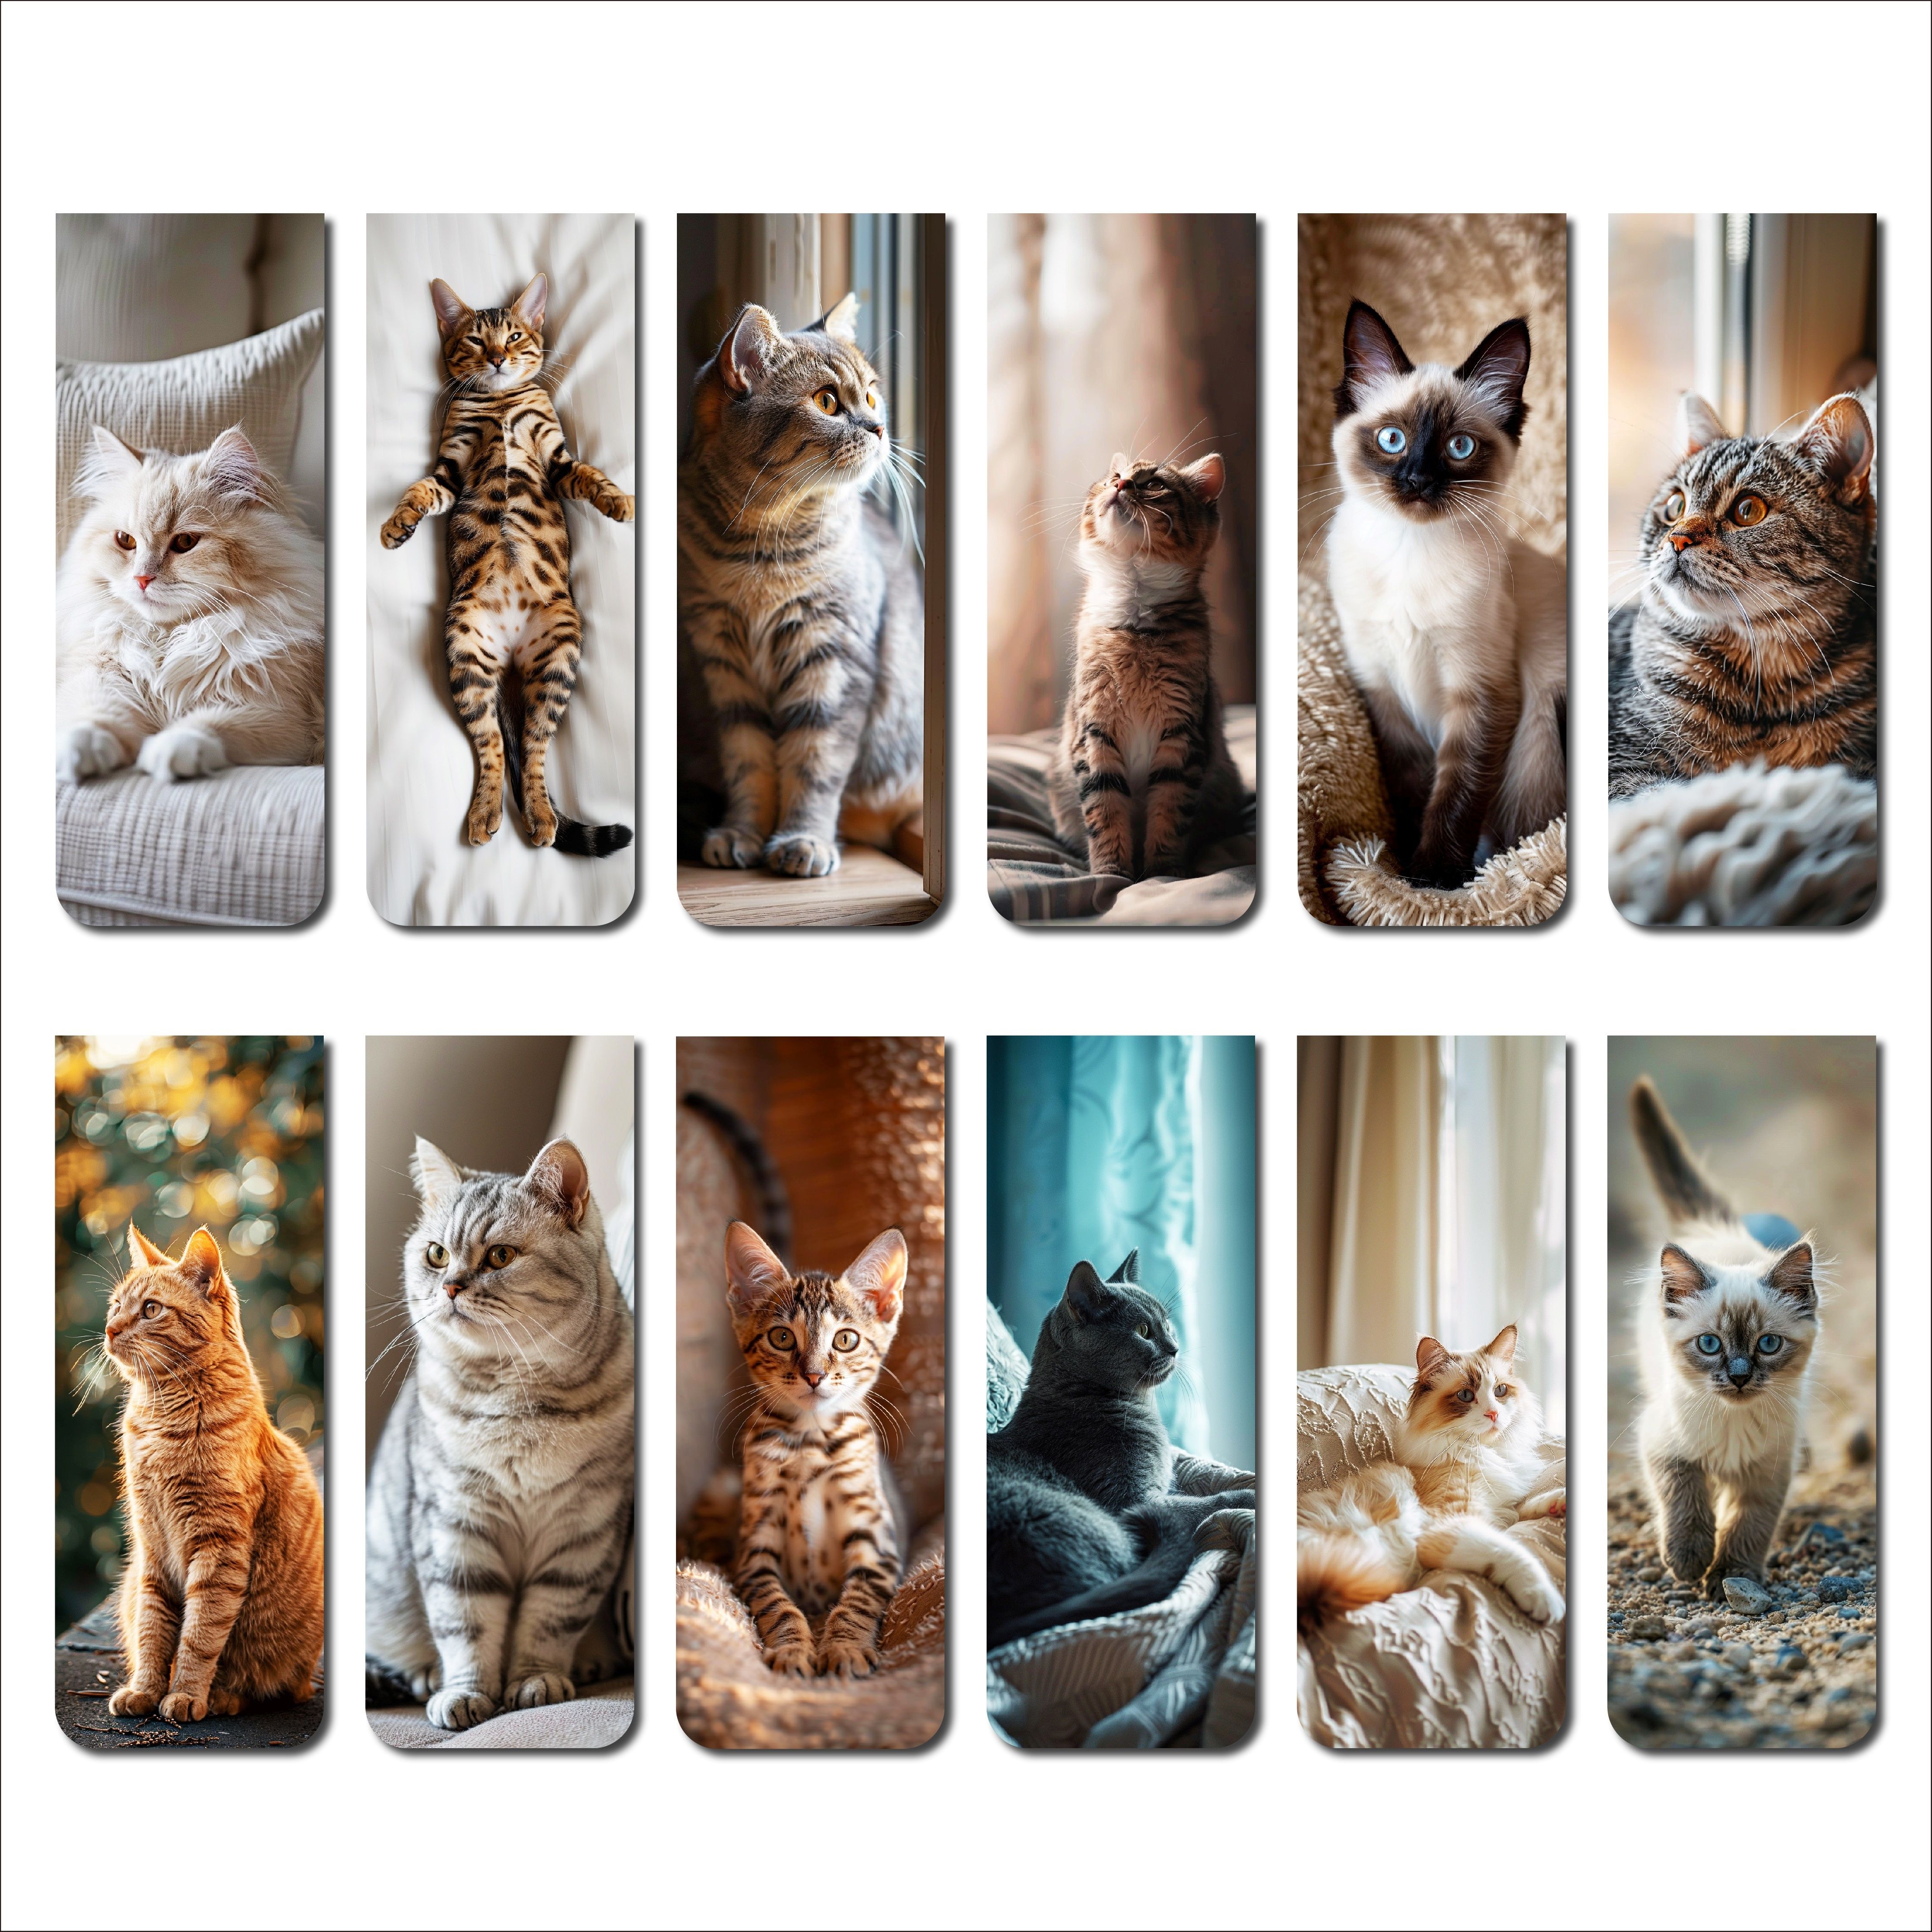 

12 Pcs Cat Magnetic Bookmarks - Assorted Pet Design Page Markers For Readers, Students, And Teachers - Paper Reading Supplies And Party Favors